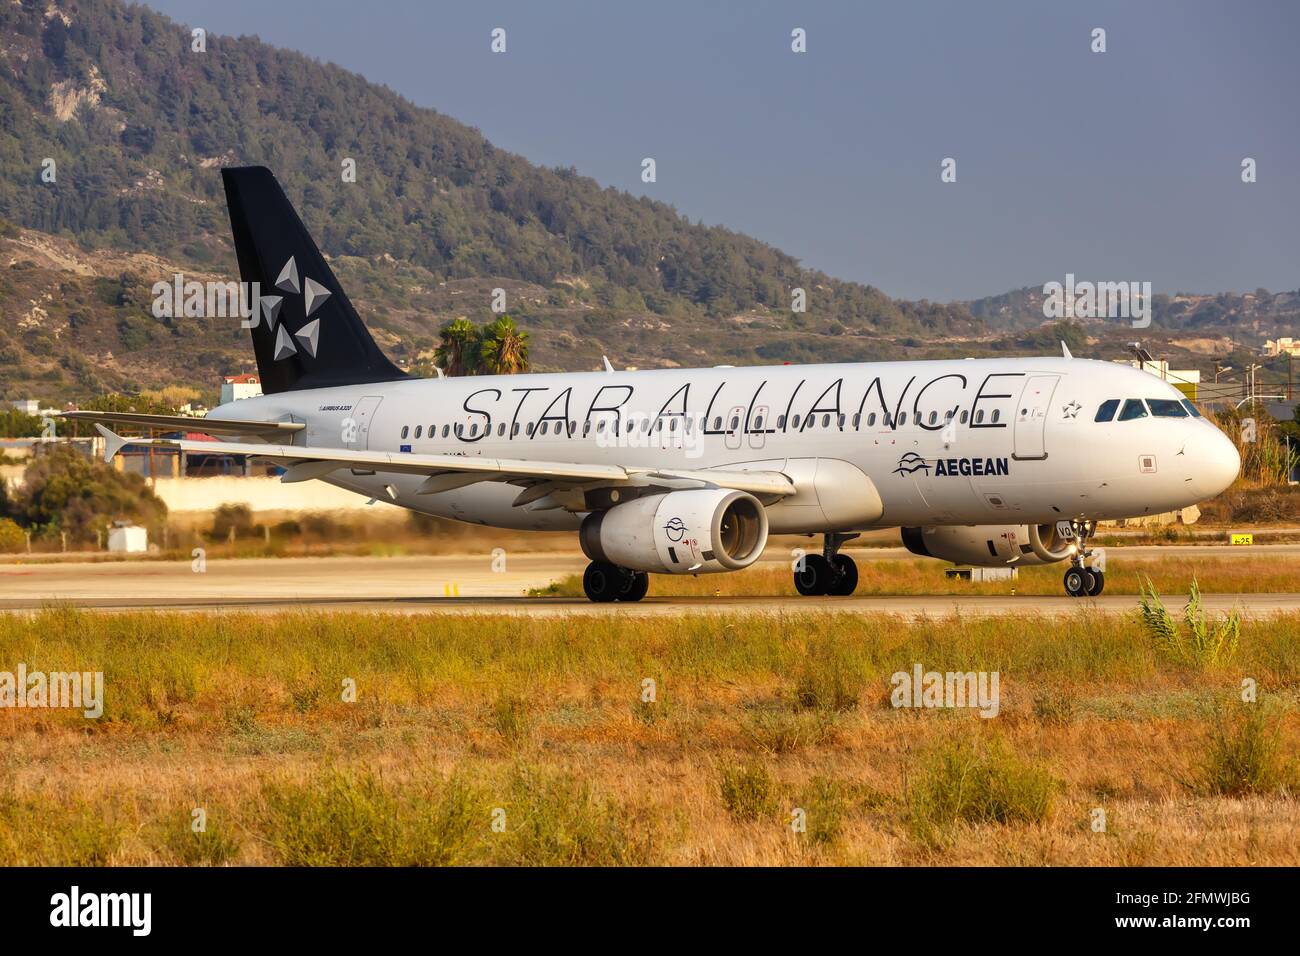 Rhodes, Greece - September 13, 2018: Aegean Airlines Airbus A320 airplane  with the Star Alliance special livery at Rhodes Airport (RHO) in Greece  Stock Photo - Alamy